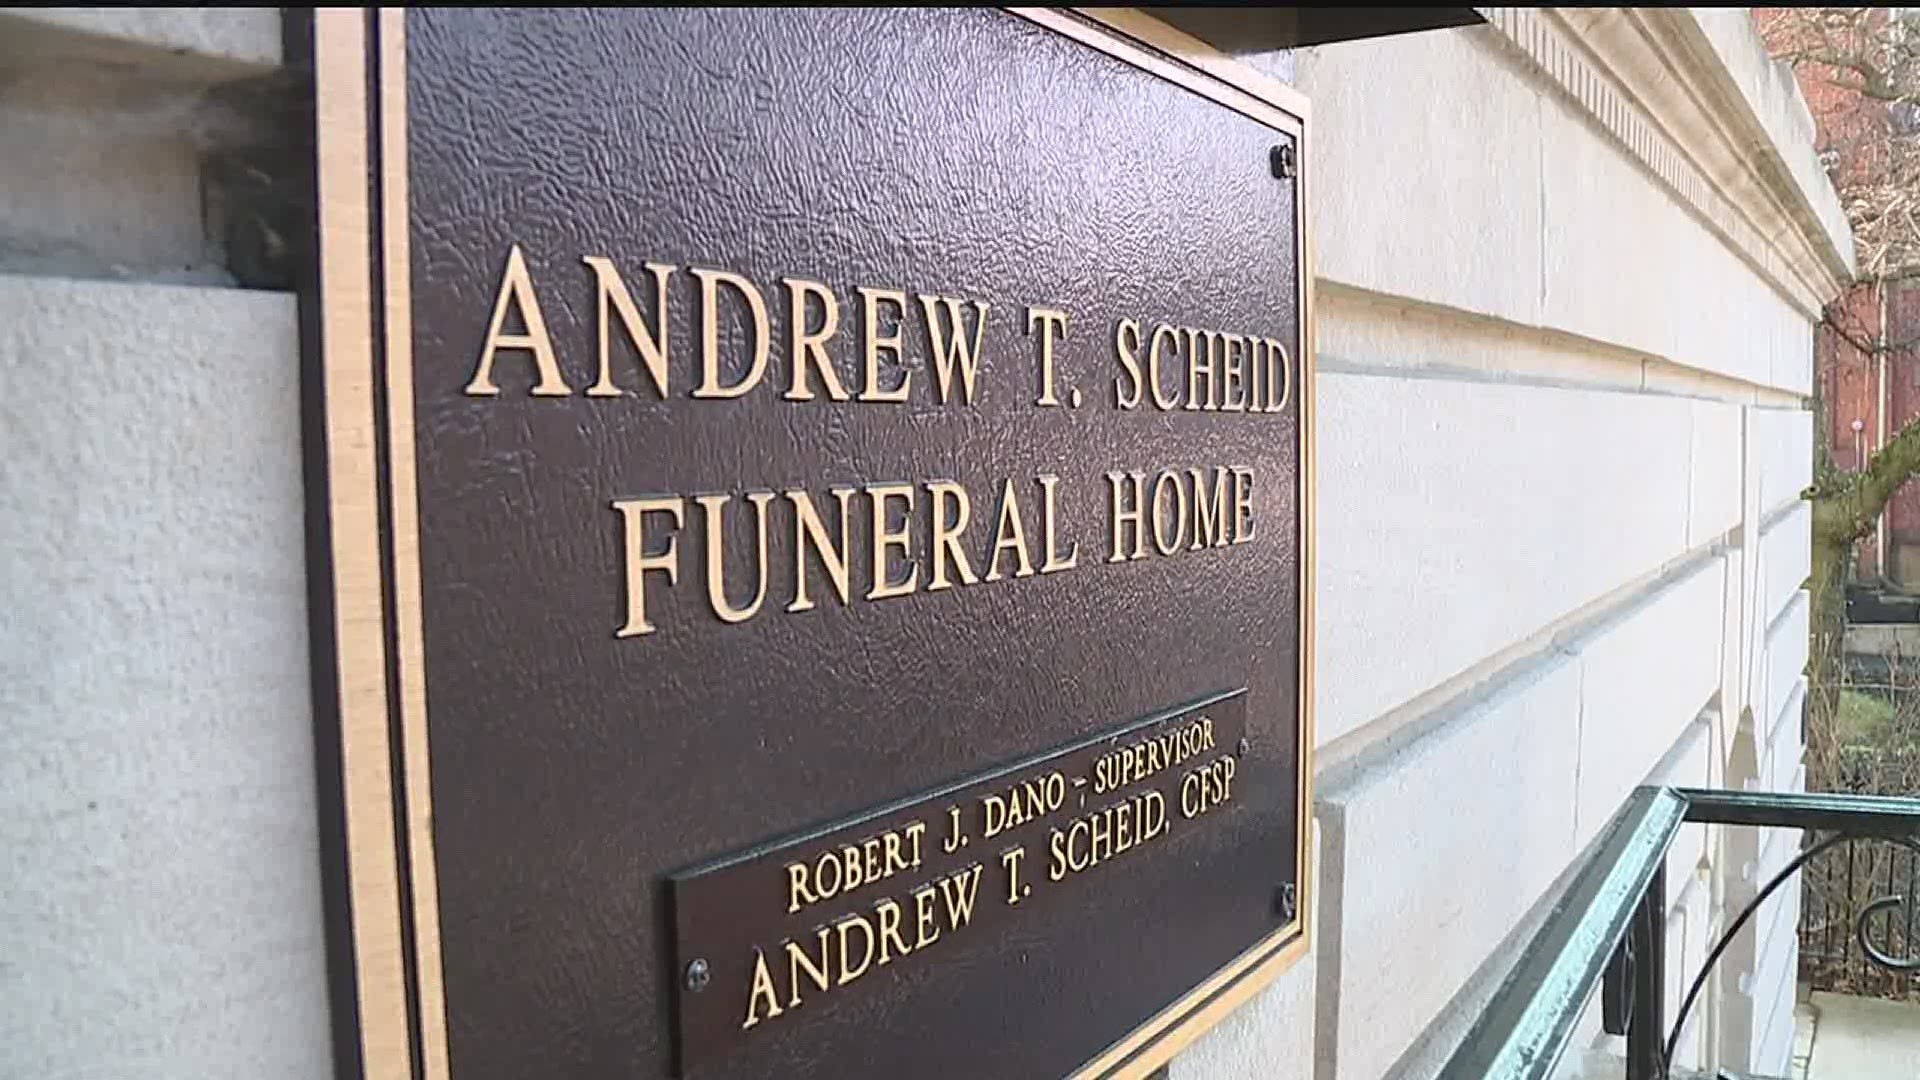 Andrew T. Scheid failed to show up for a hearing Friday morning.